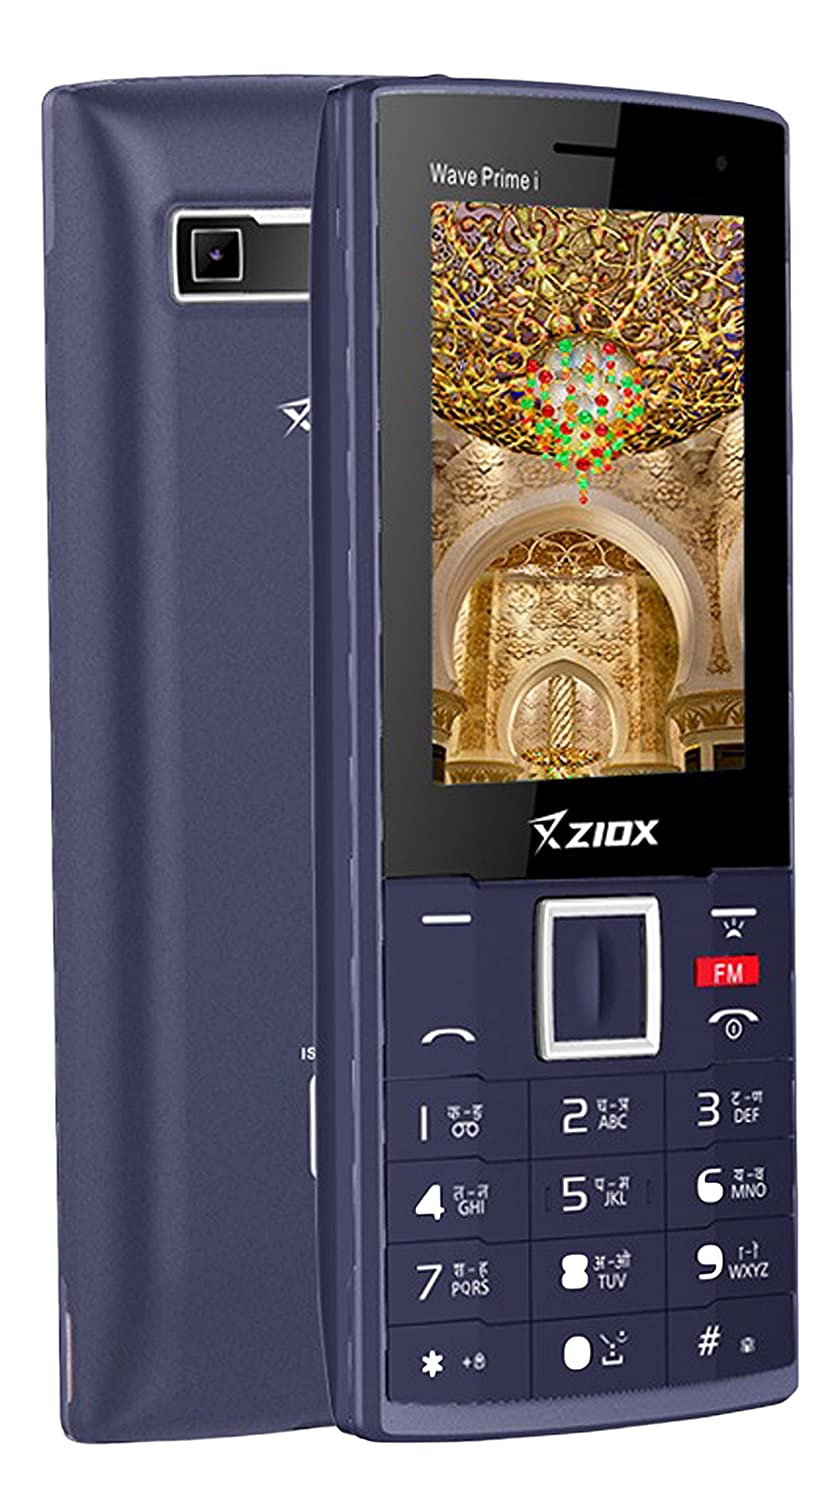 ZIOX Wave Lite Price in Kenya and Specifications.